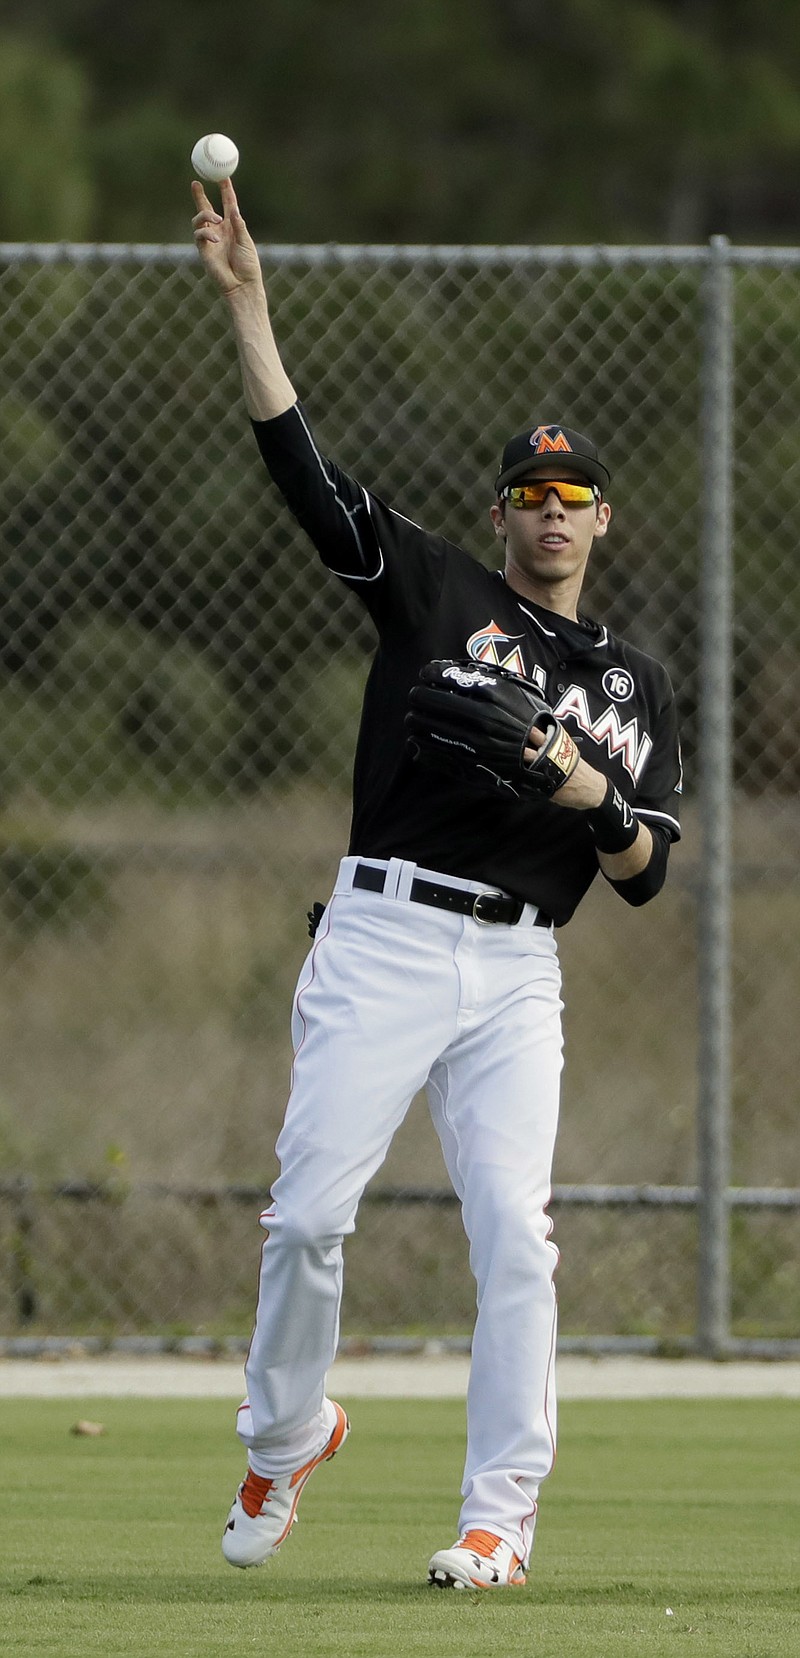 Miami Marlins left fielder Christian Yelich throws during a spring training baseball workout Saturday, Feb. 18, 2017, in Jupiter, Fla. Marlins manager Don Mattingly expects the left-handed hitting Yelich, a former Gold Glove winner, current member of Team USA for the World Baseball Classic and a career .293 hitter, to take another step forward this season.